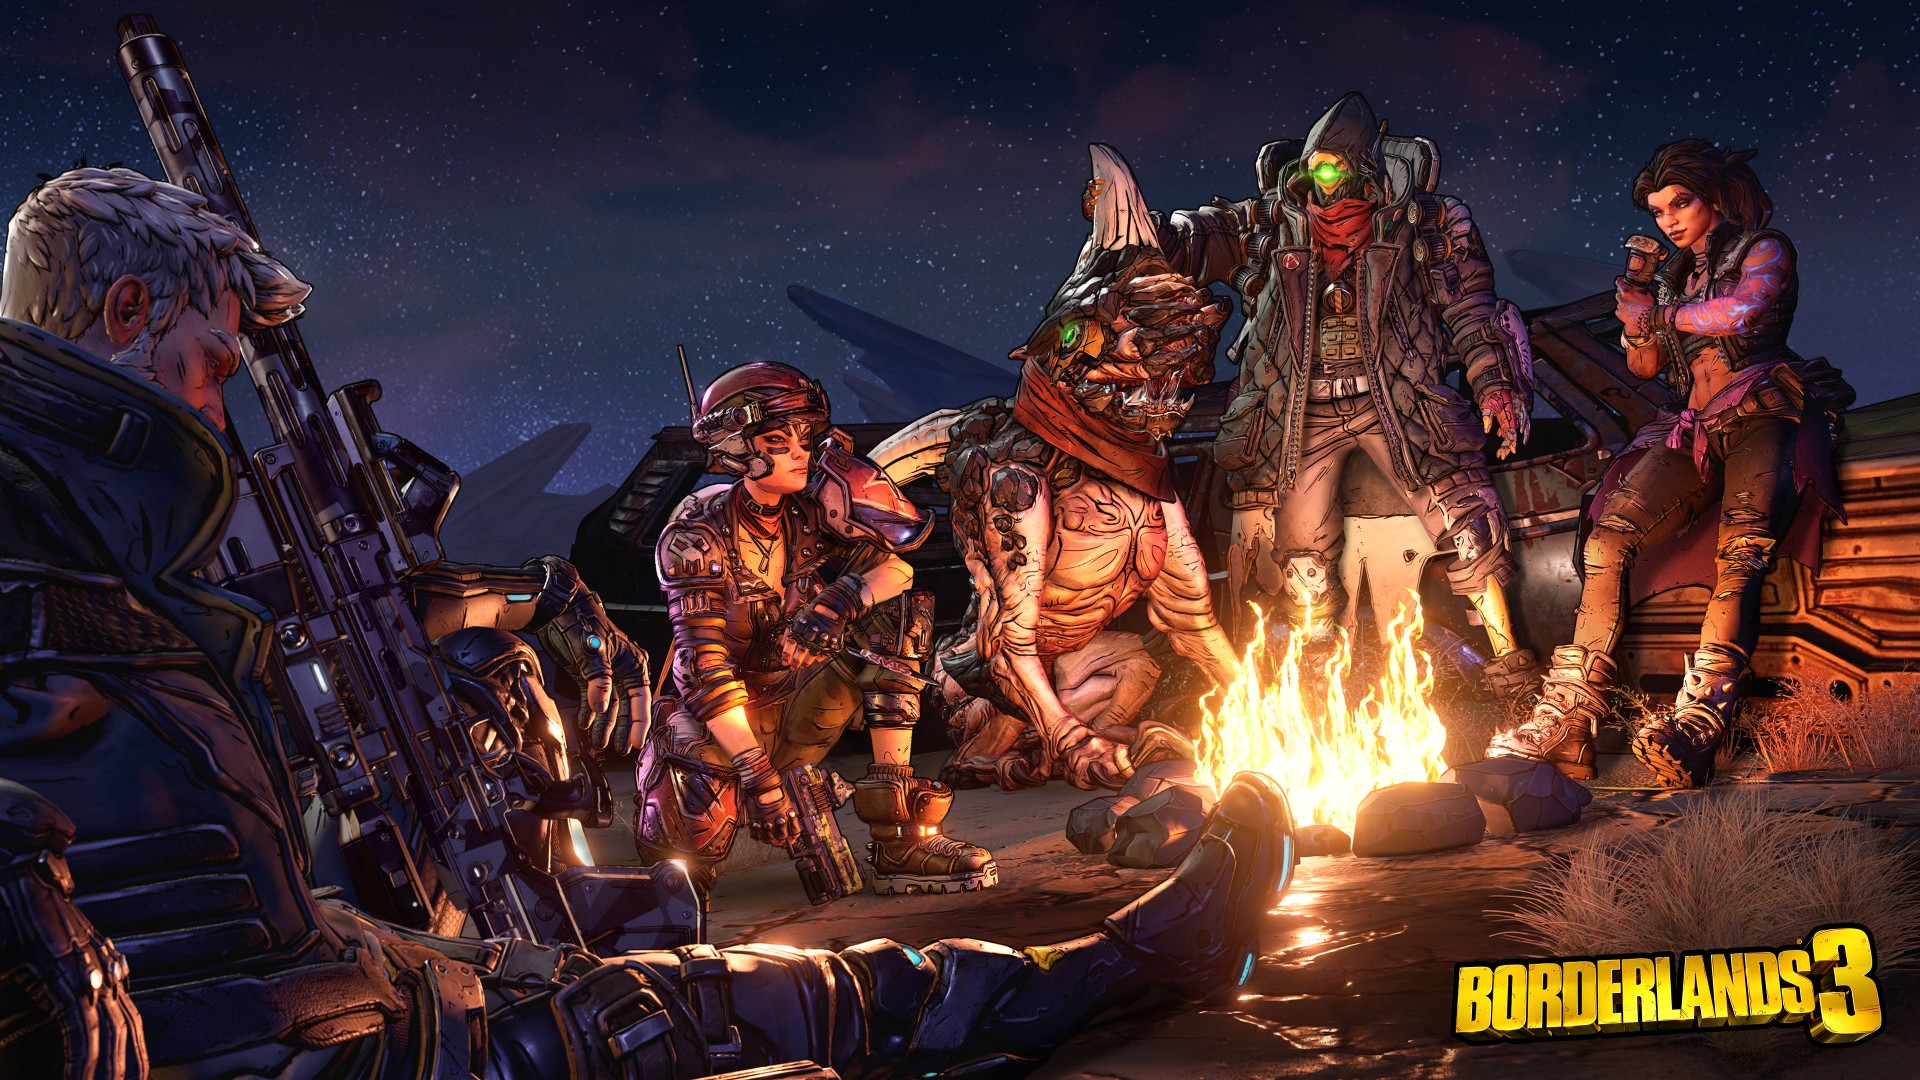 Borderlands 3 Arrives September 13 on Xbox One, Watch the New Trailer Today